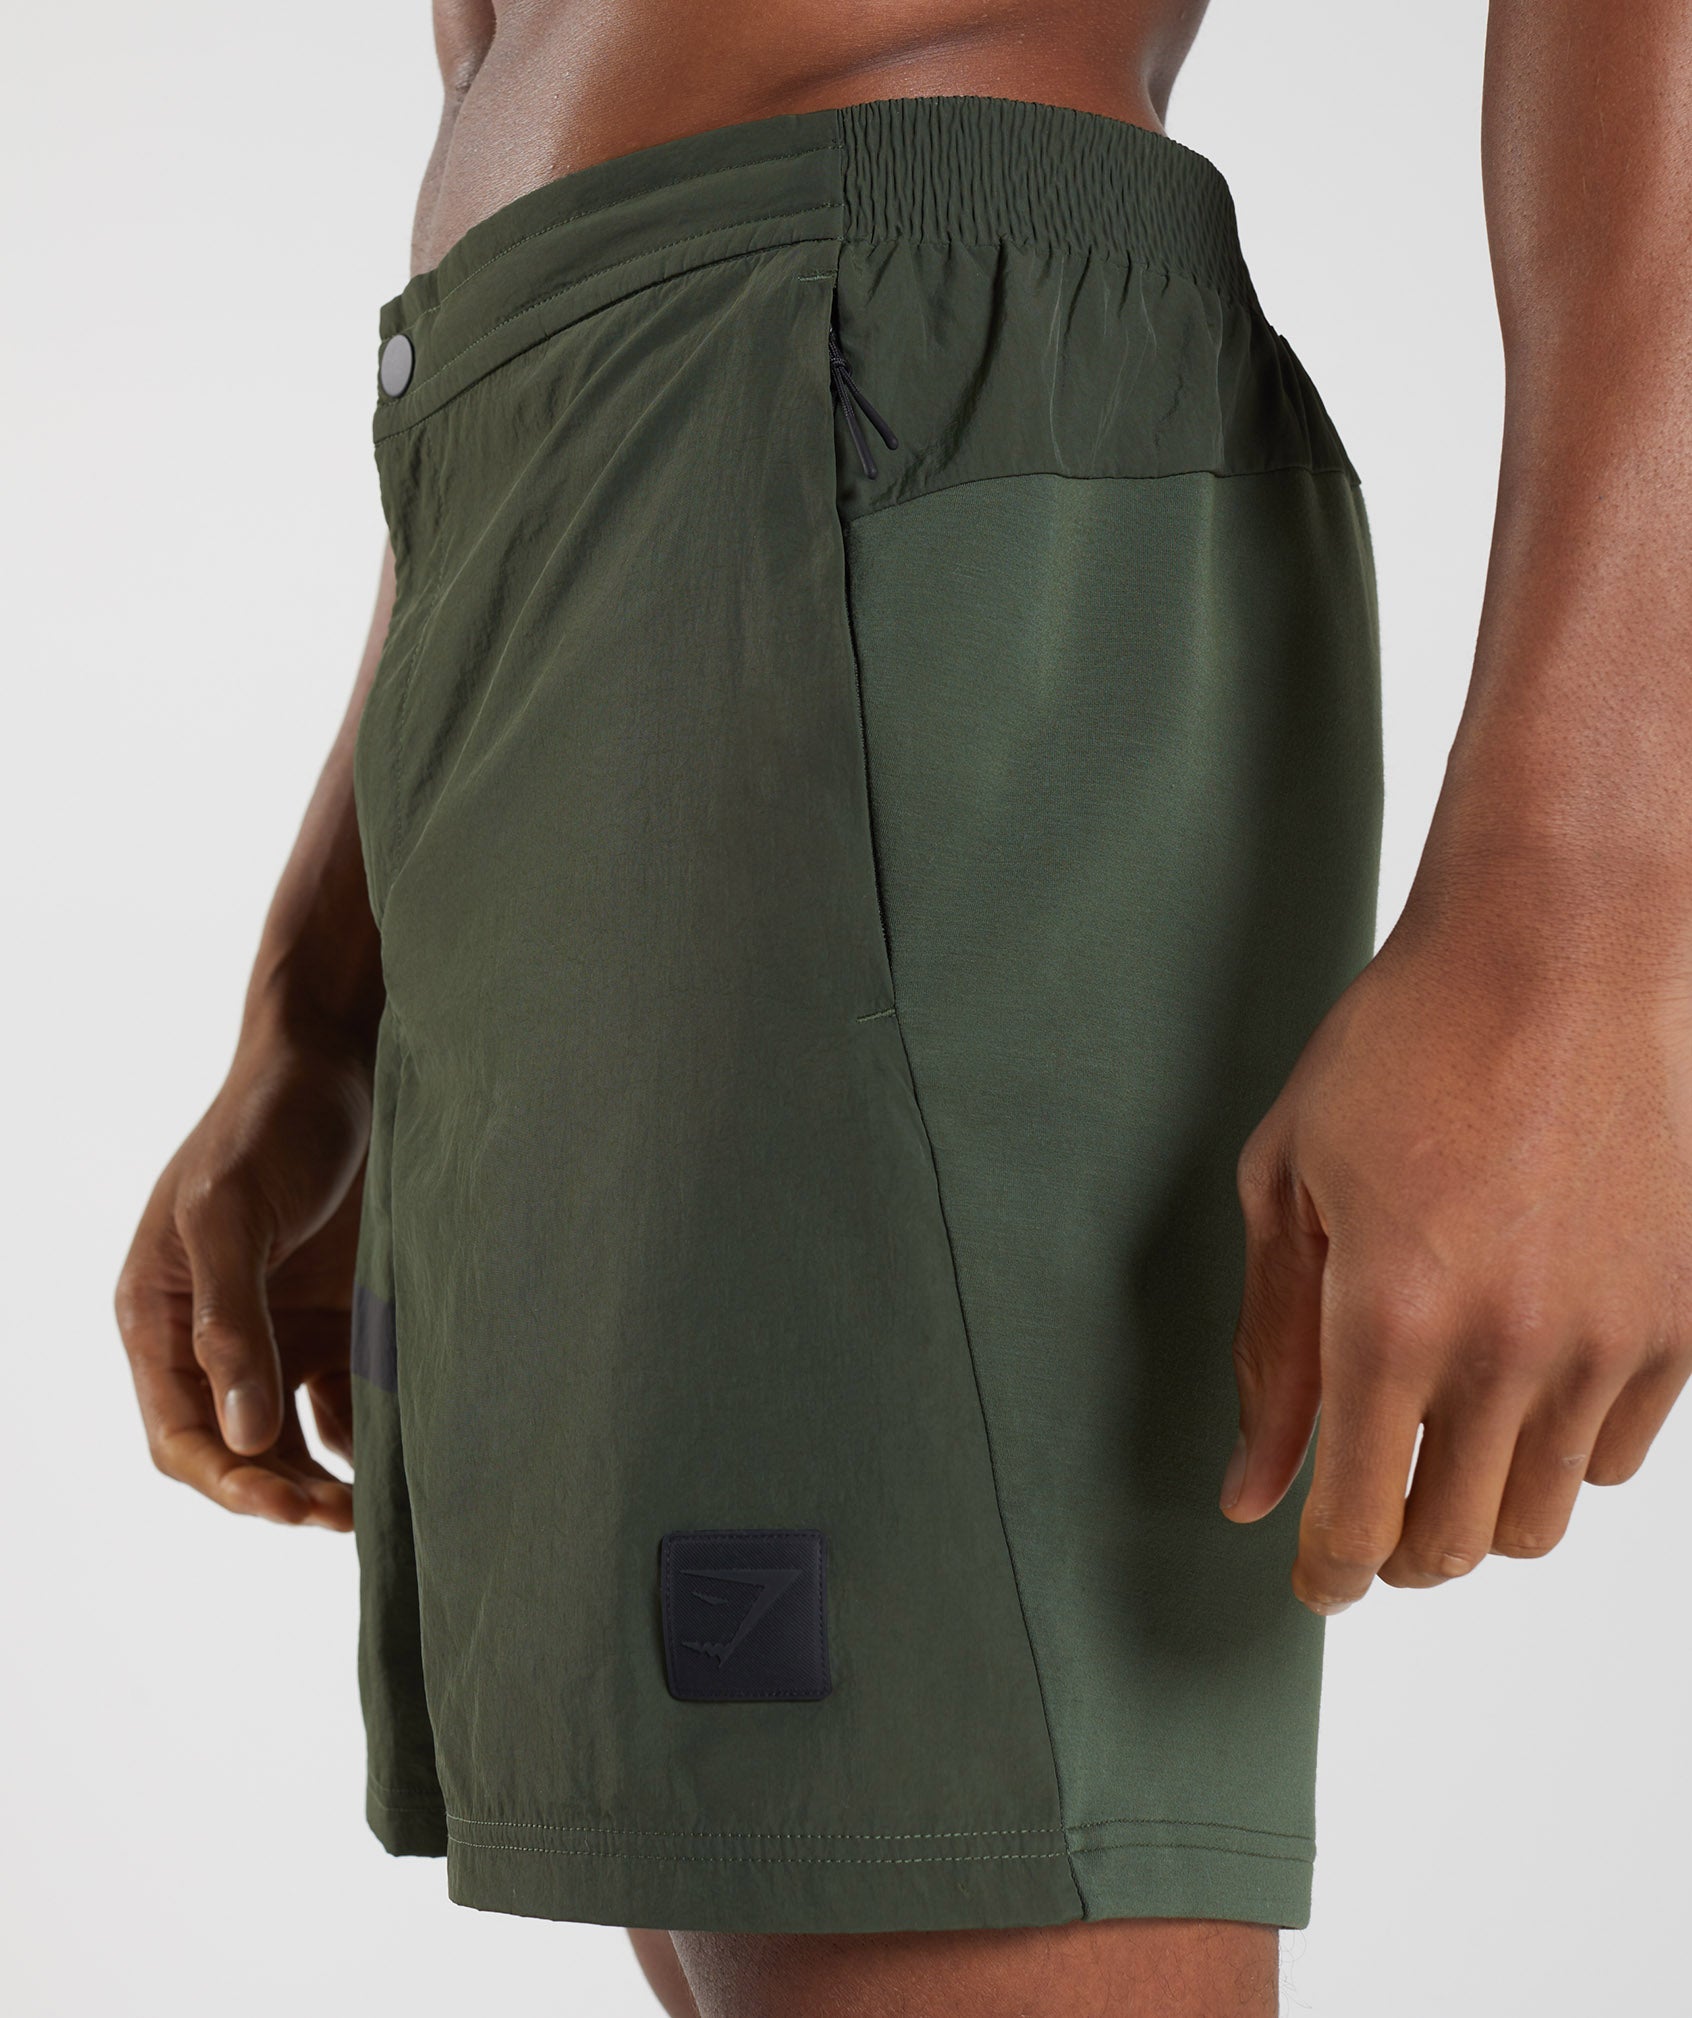 Retake Woven 7" Shorts in Moss Olive - view 5